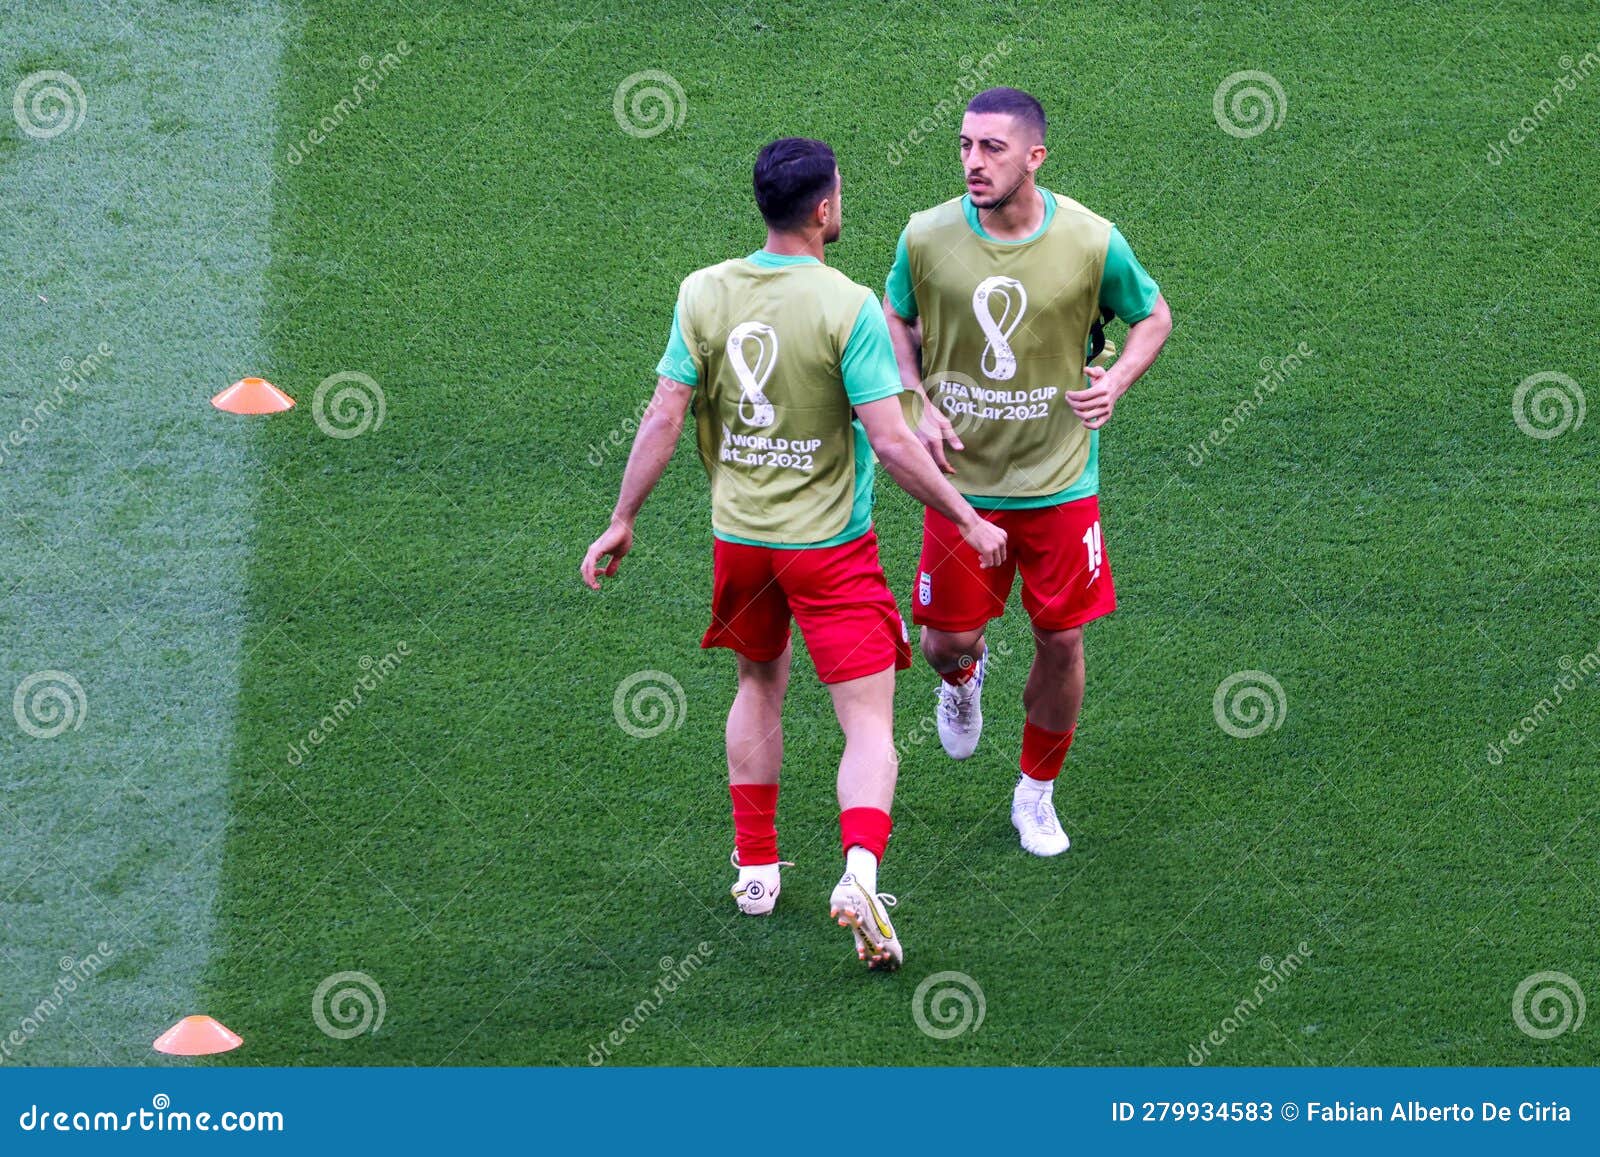 Majid Hosseini in the Previous Warm-up during the Match between England Vs